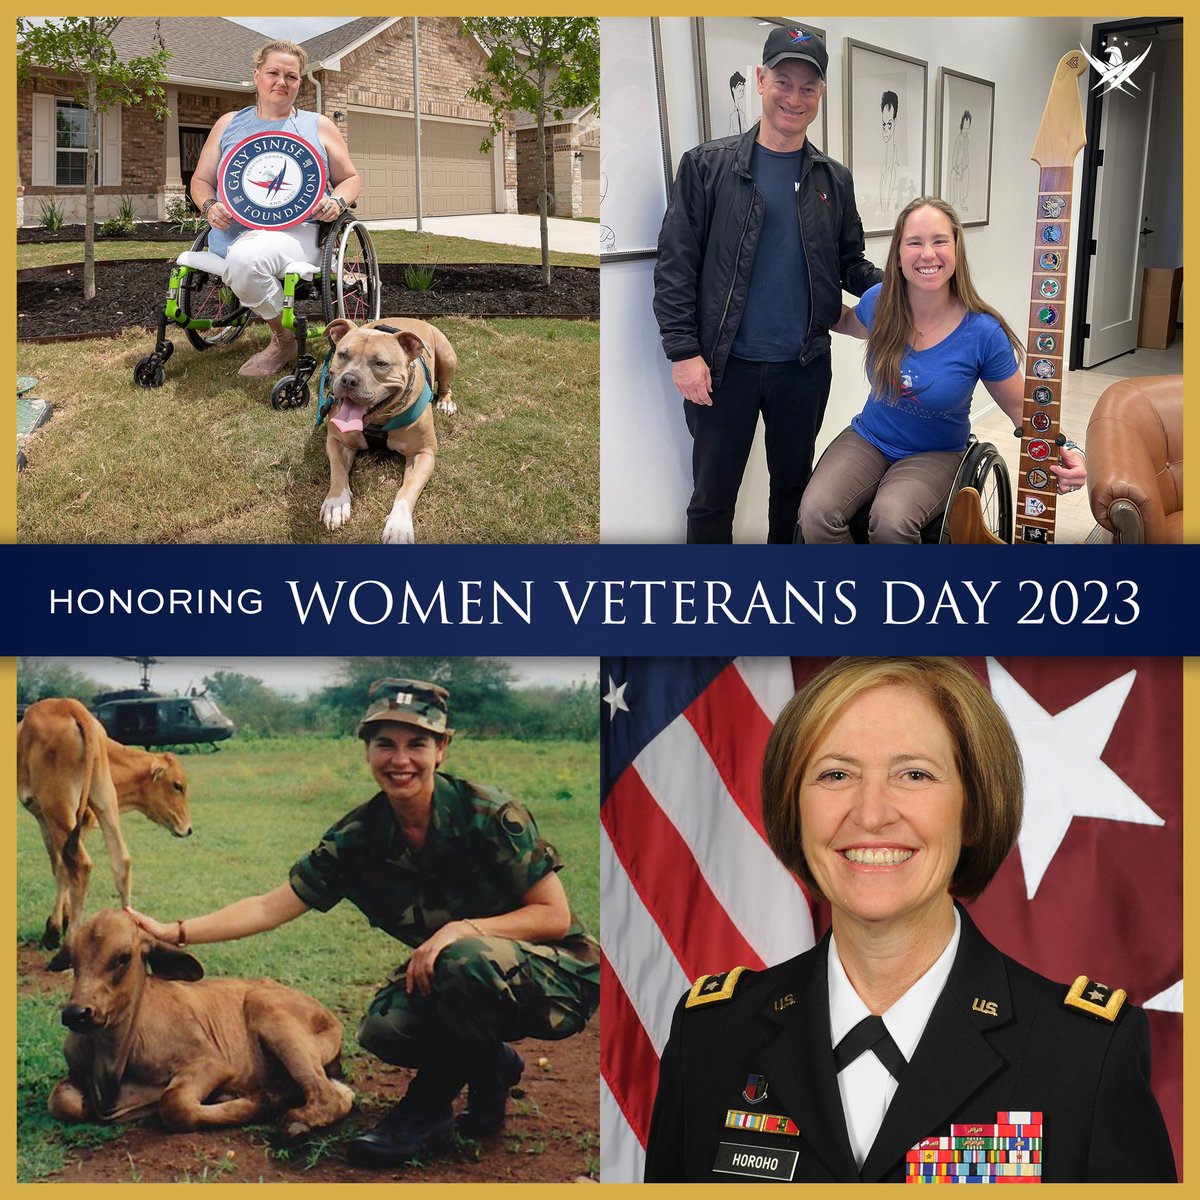 On #WomenVeteransDay, we honor the nearly two million women veterans for their selfless service and sacrifice to protect our nation's security and freedom.